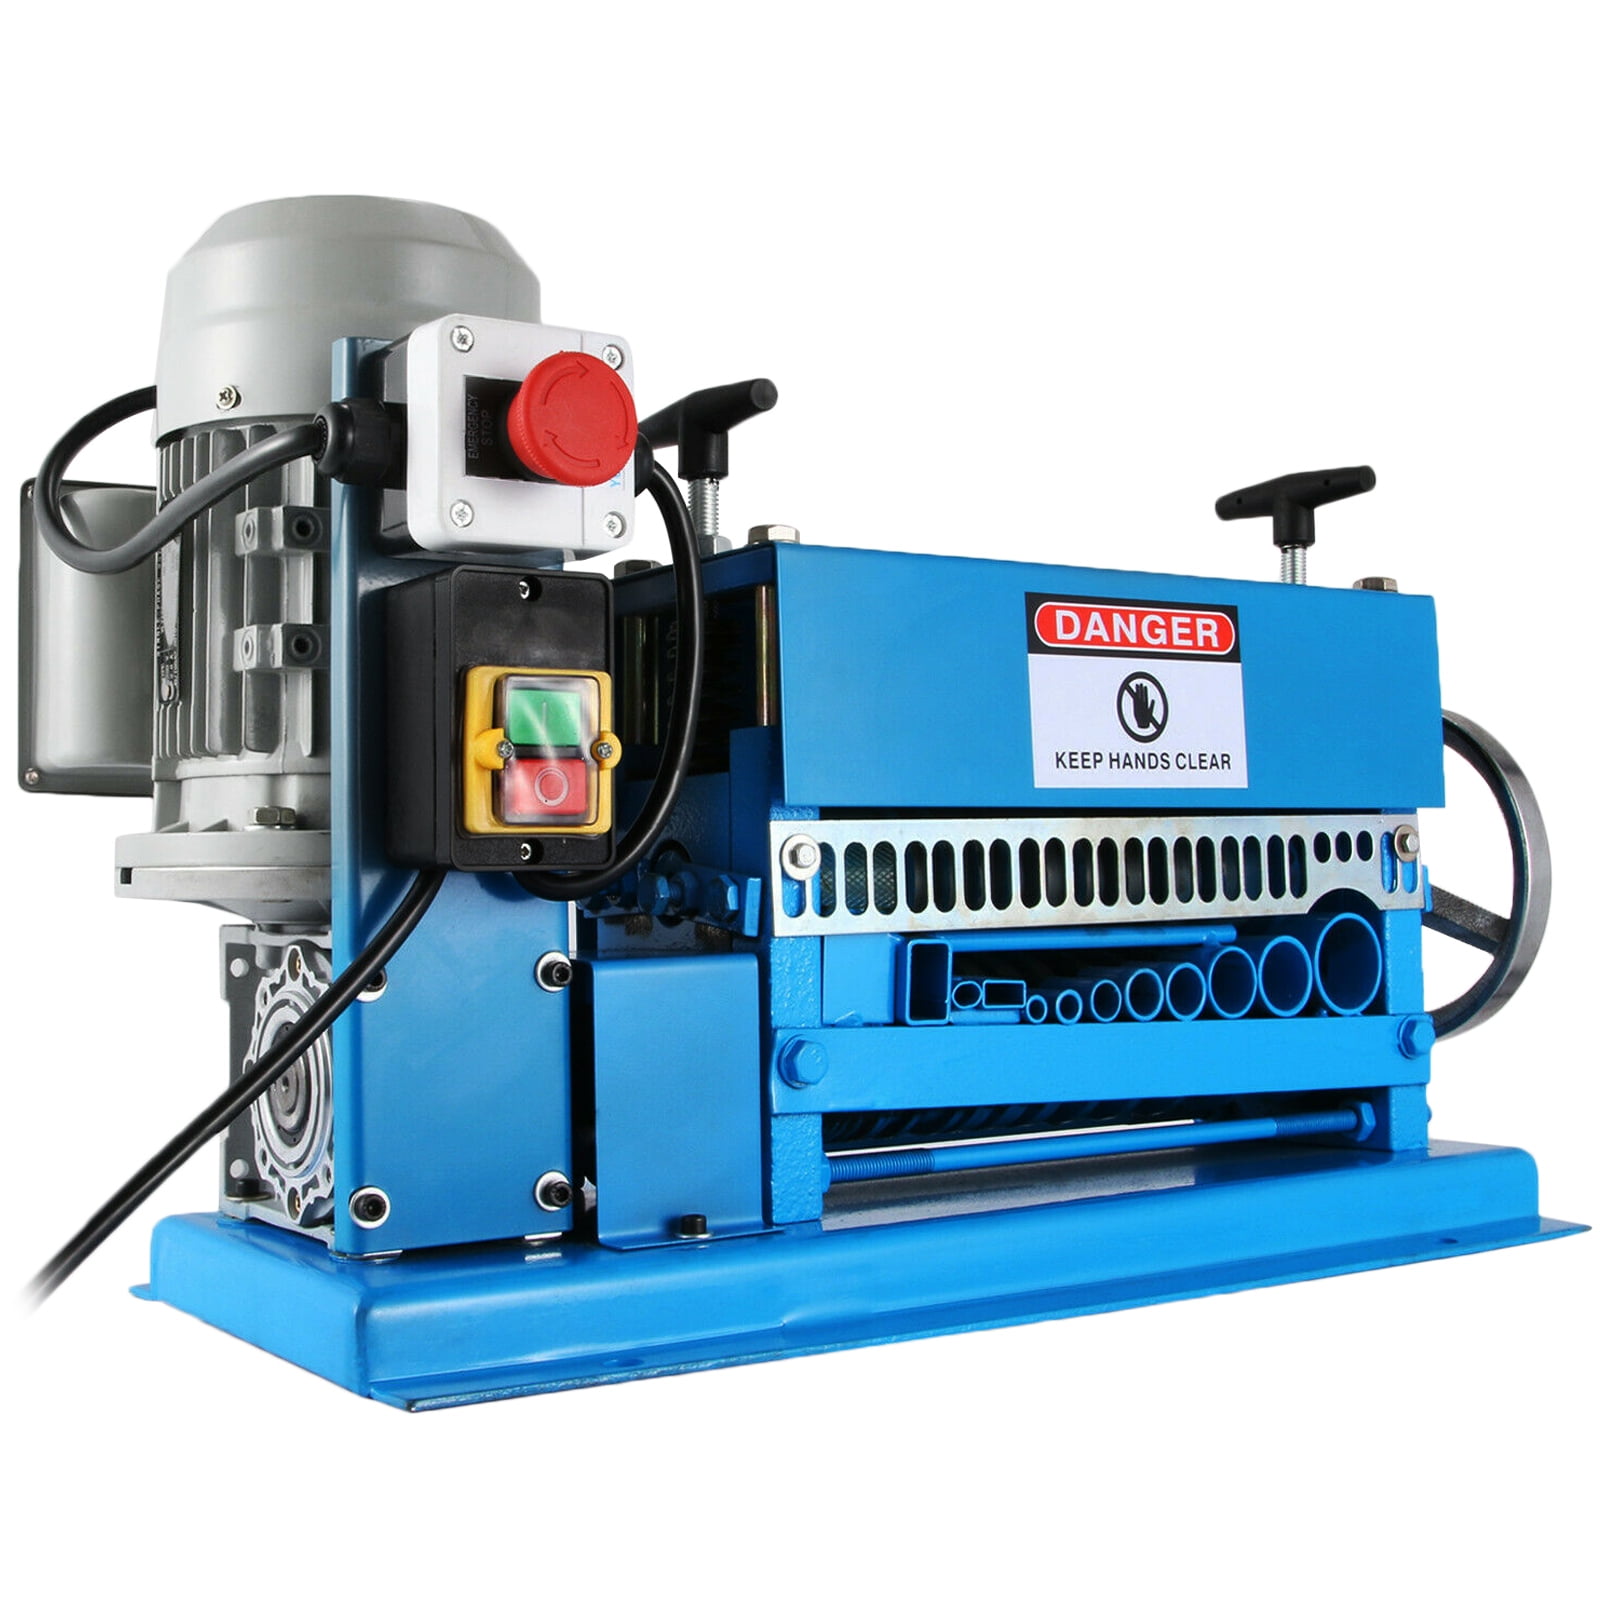 Wire Stripper Machine Speed 60ft/Min Wire Stripping Machine Wire Gauge Range 0.06-1inch Automatic Wire Stripper Portable For Scrap Copper Wire Cable Recycling 